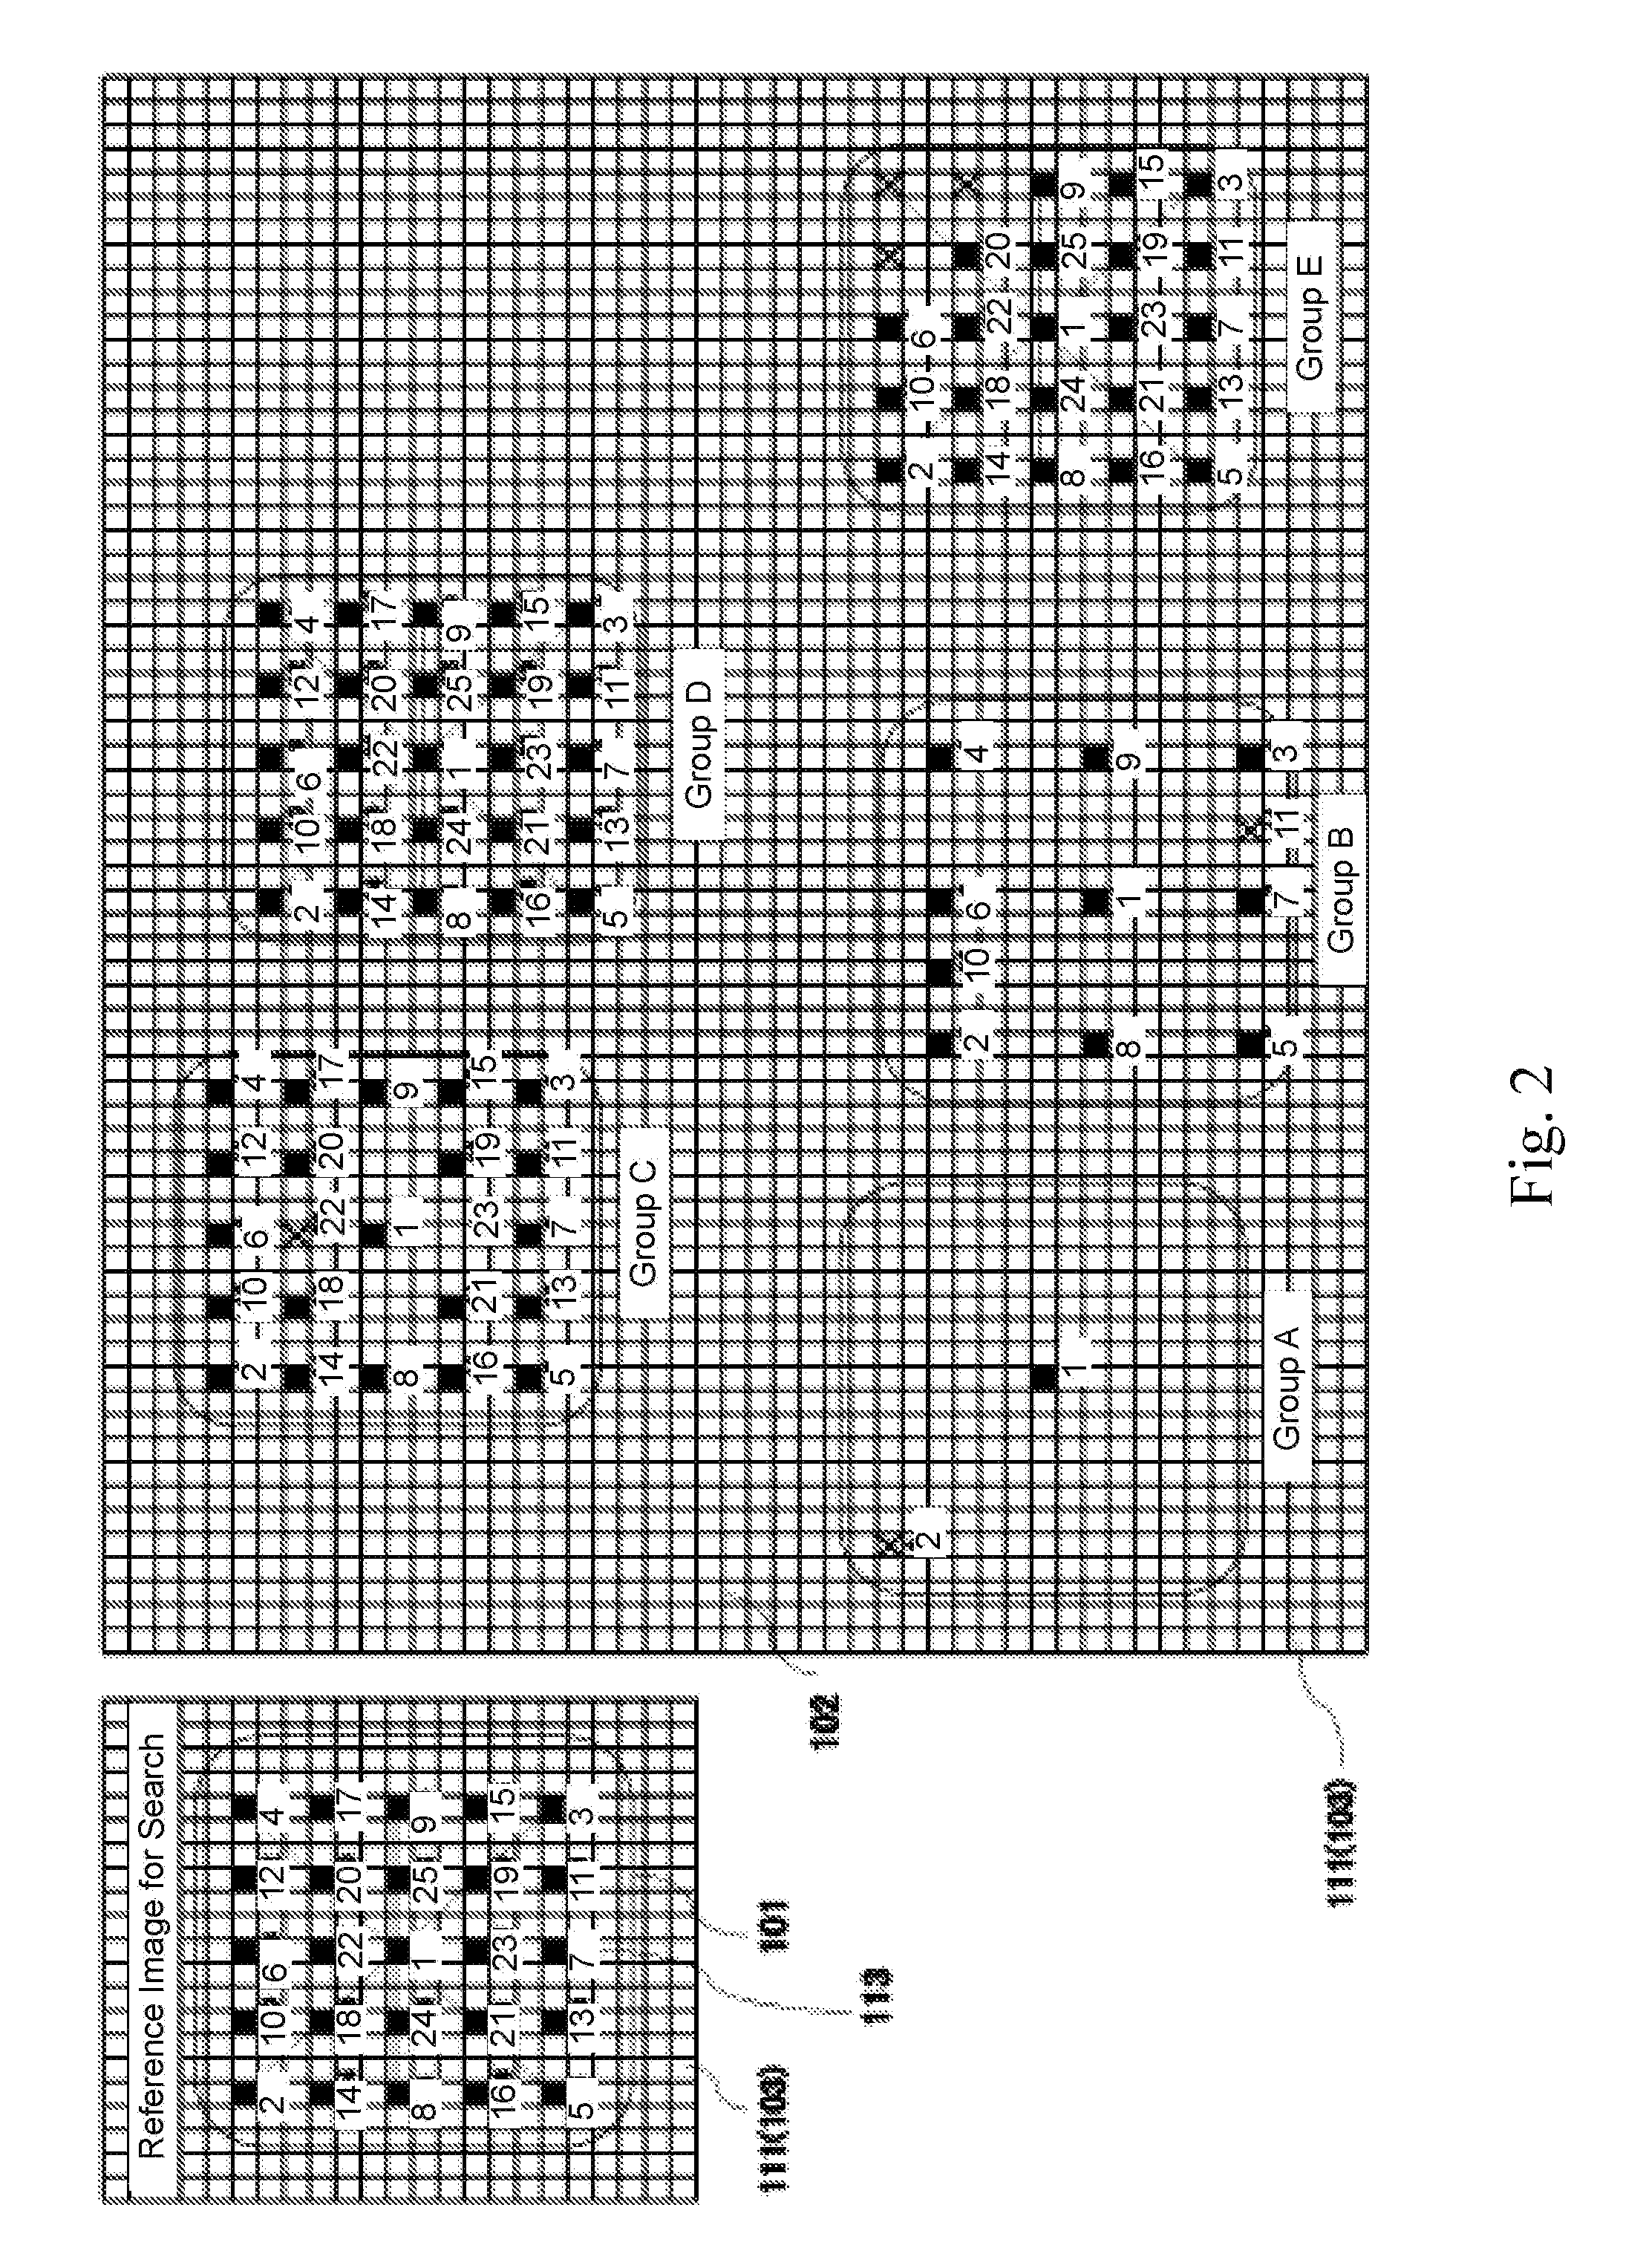 Memory having information refinement detection function by applying a logic operation in parallel for each memory address to the match/mismatch results of data items and memory addresses, information detection method using memory, and memory address comparison circuit for the memory